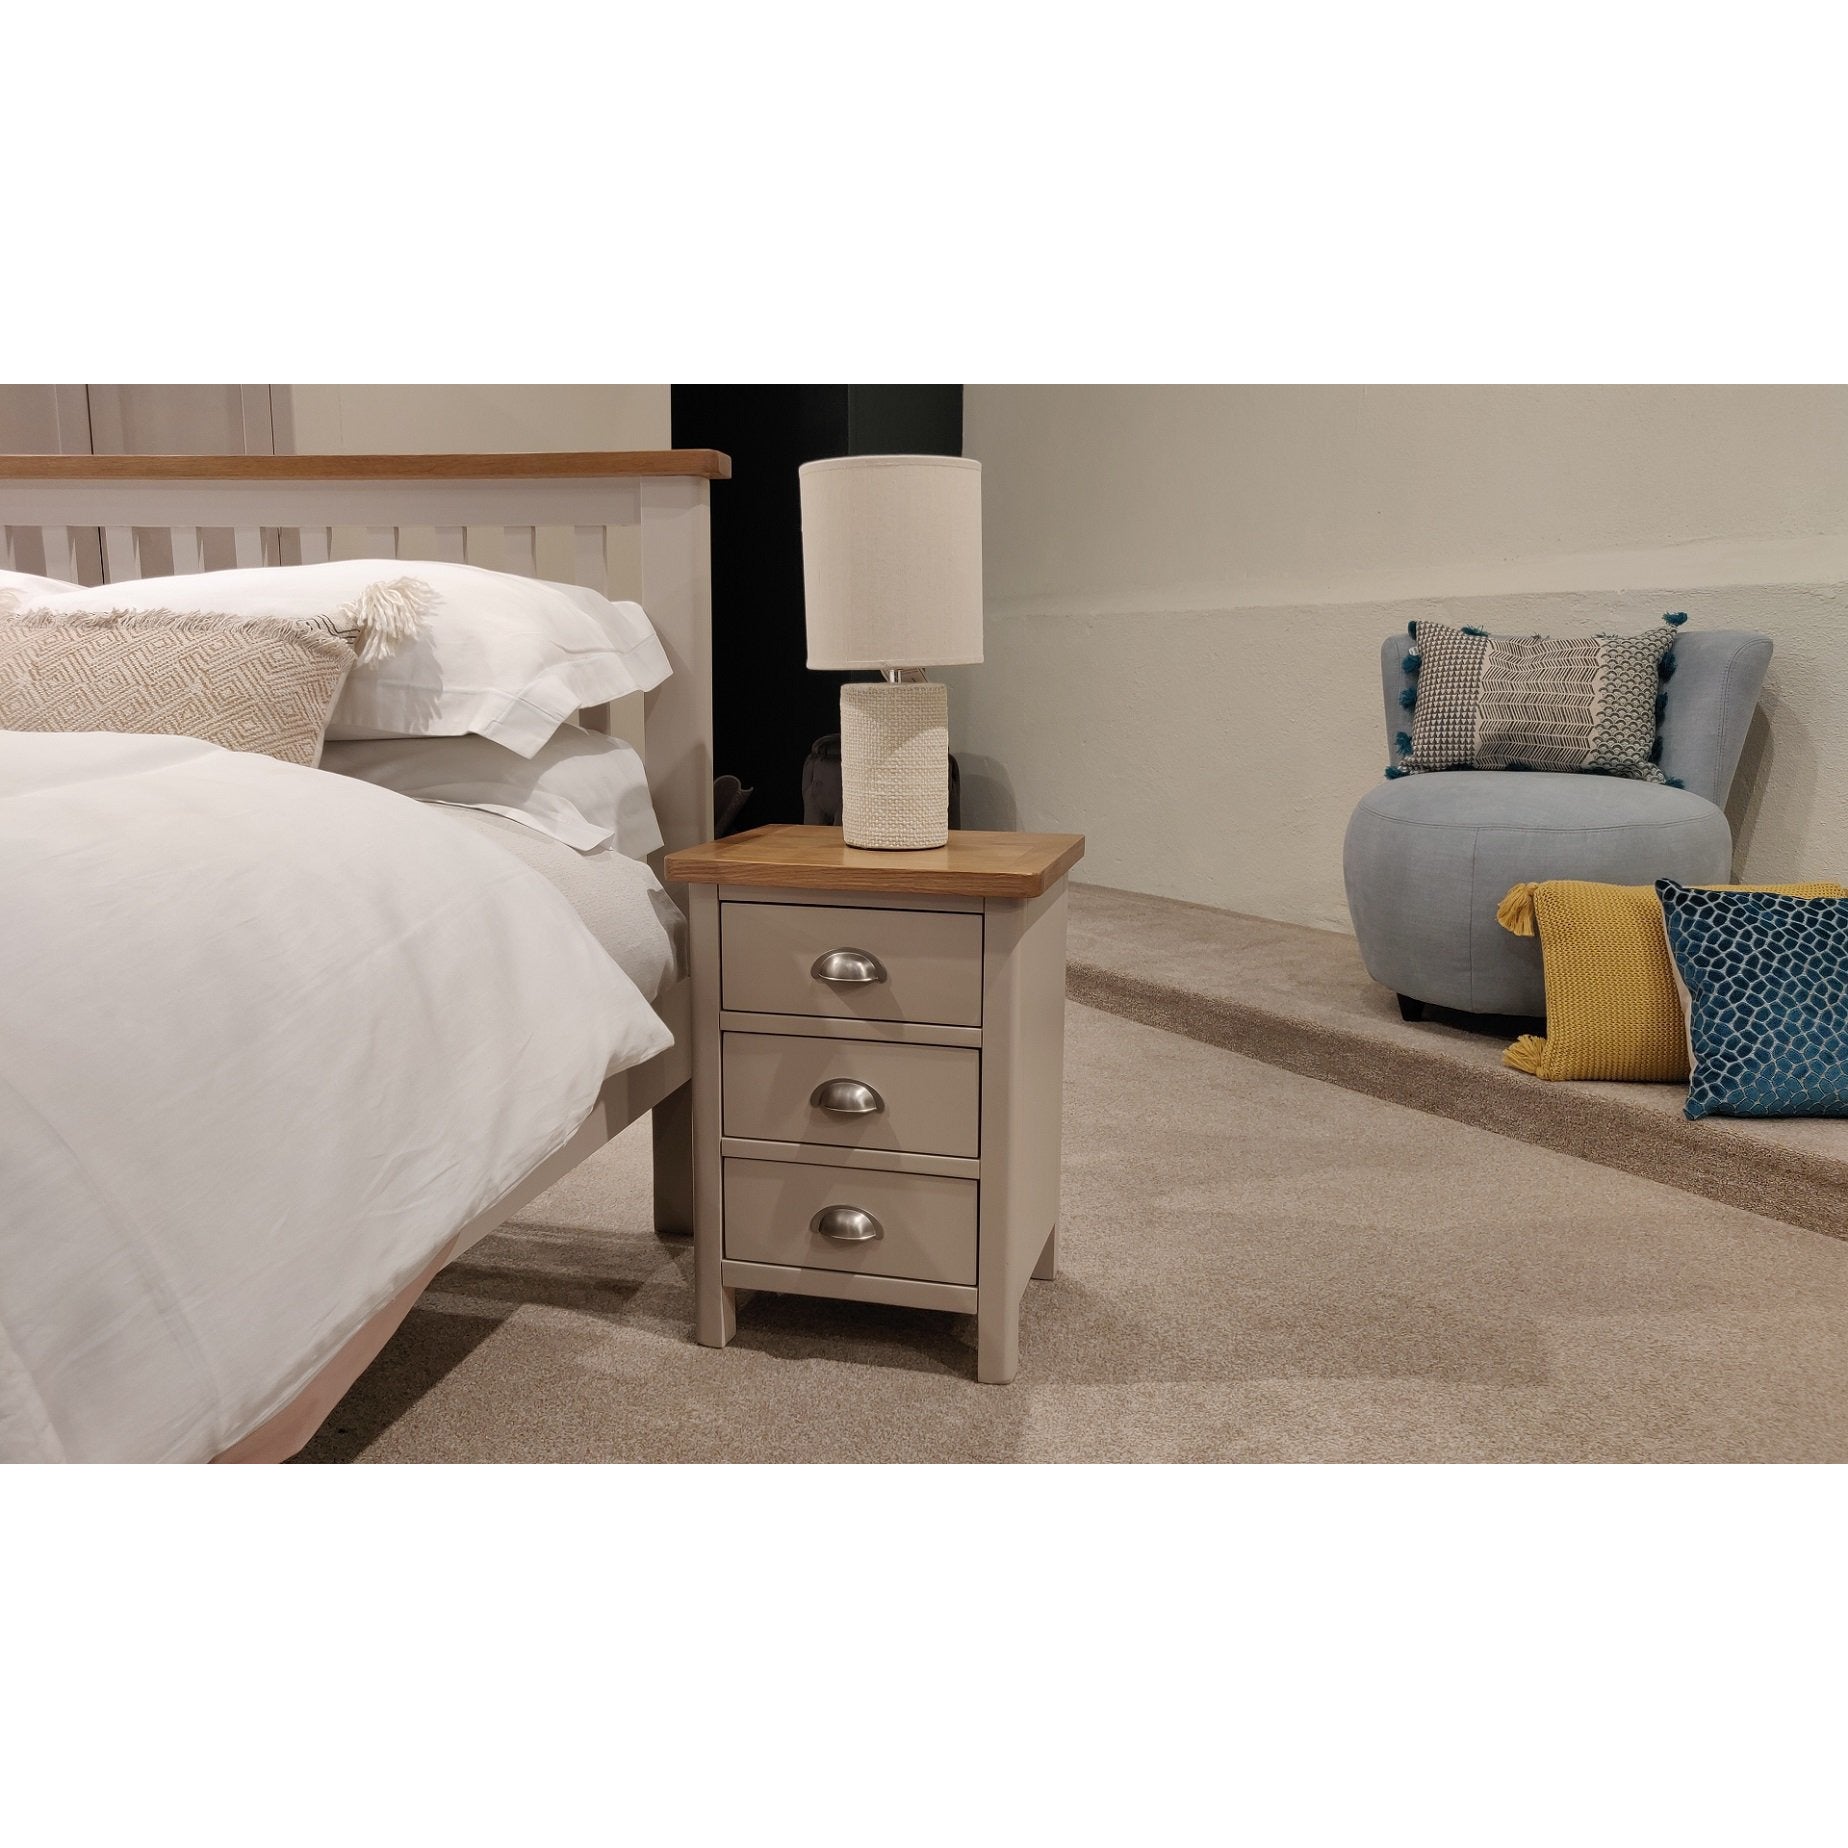 Harrogate 3 Drawer Bedside Table from Upstairs Downstairs Furniture in Lisburn, Monaghan and Enniskillen